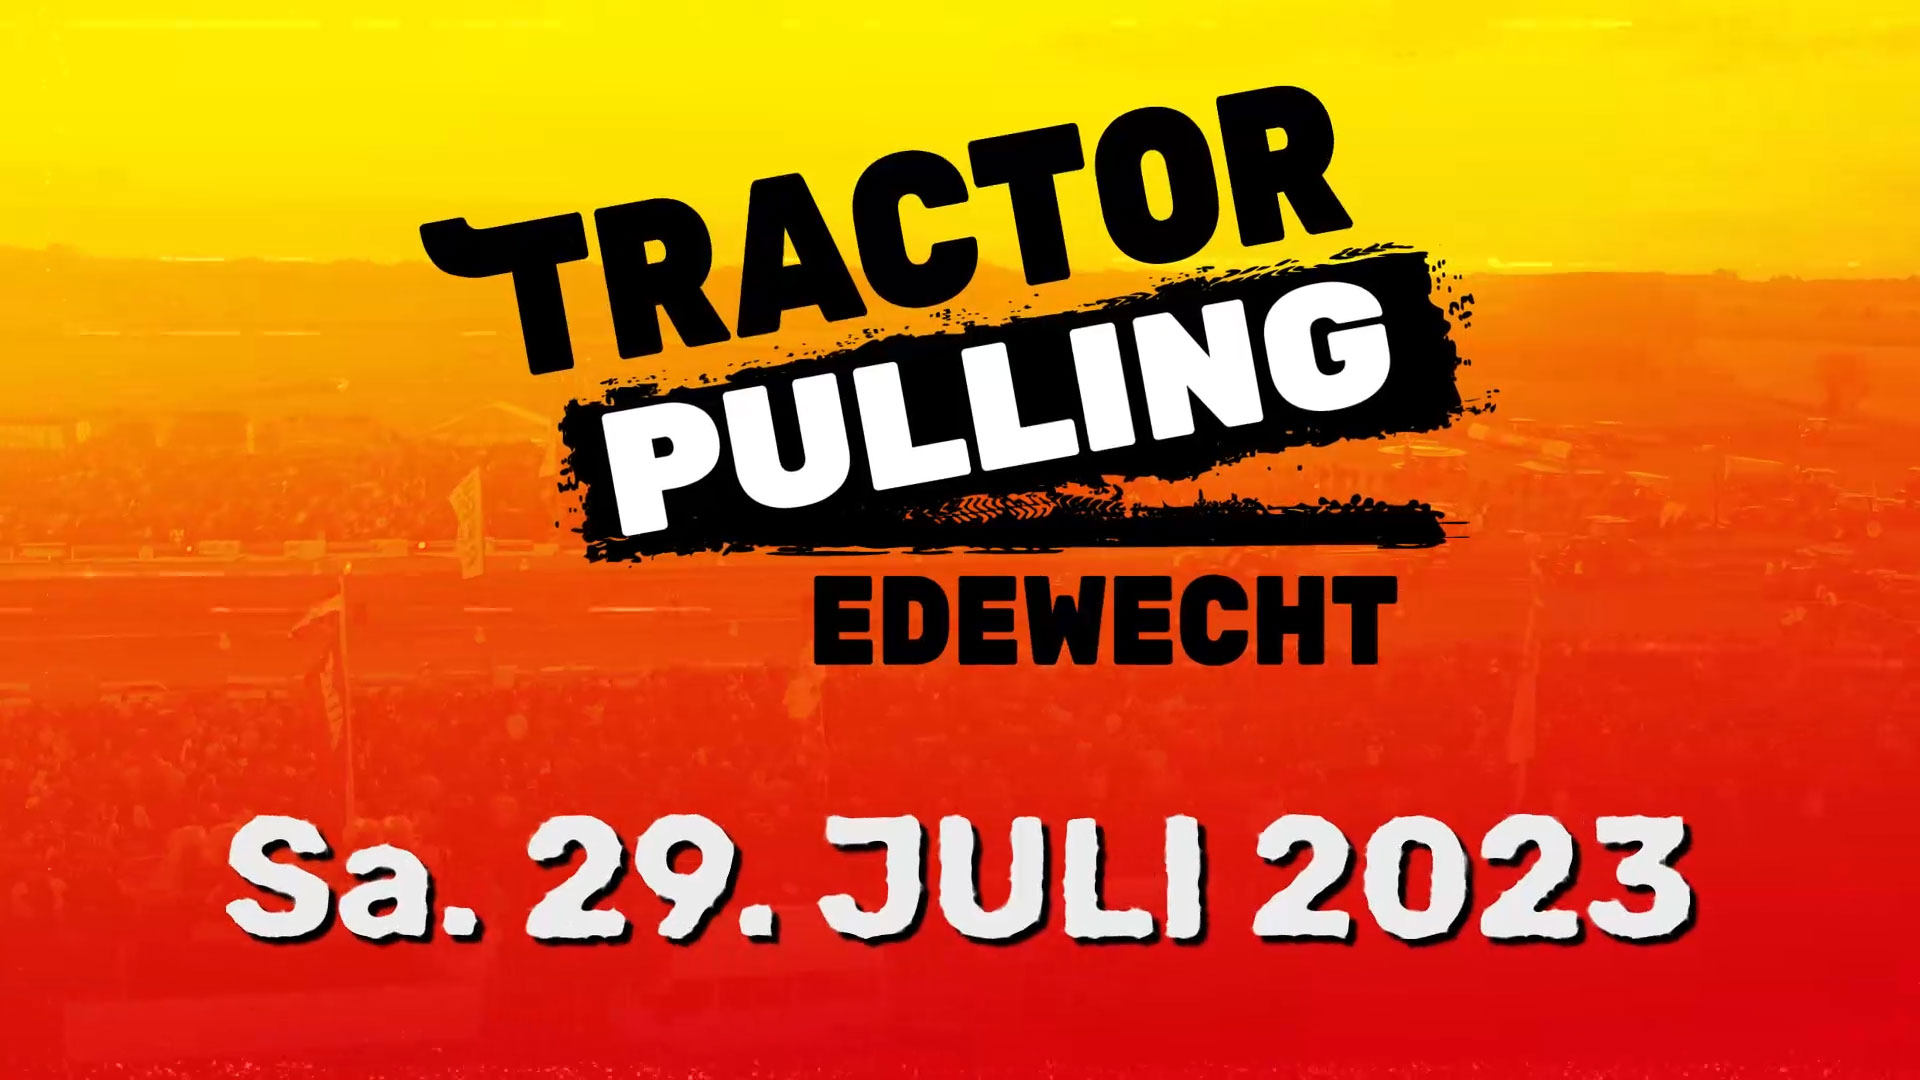 Tractor Pulling Edewecht — is not Pull enough! Full